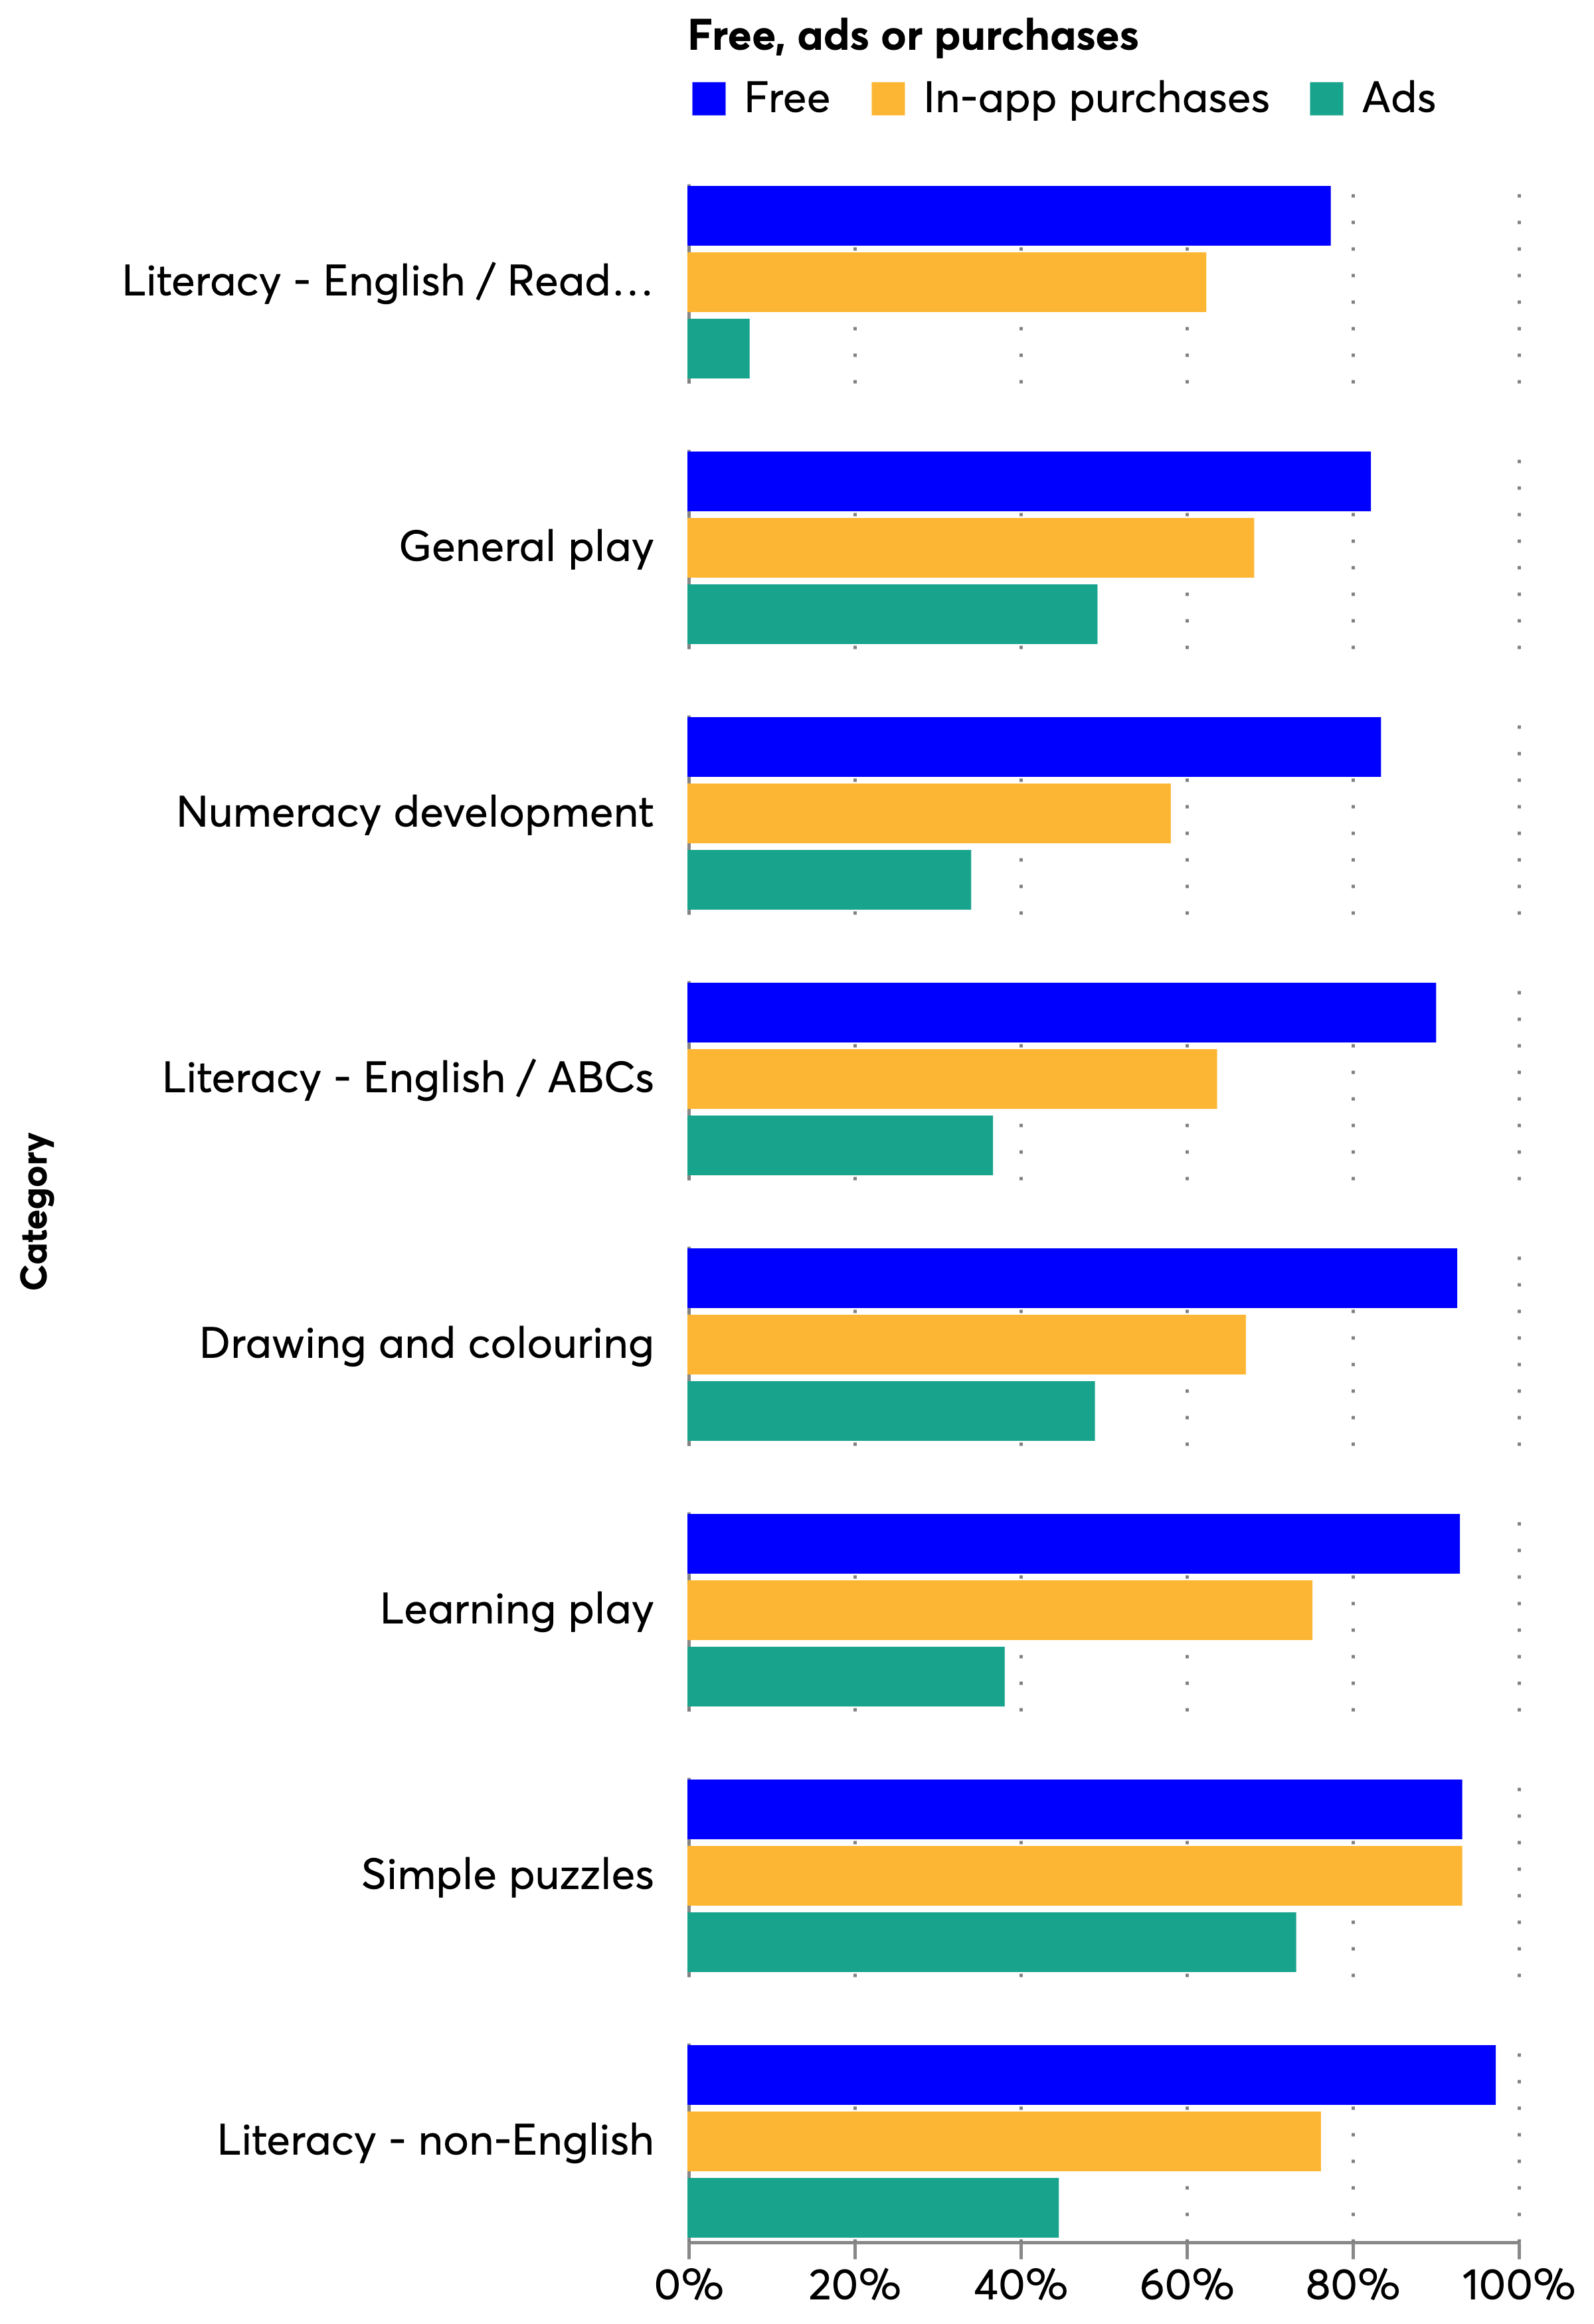 This graph shows what percentage of apps in each of the toddler app categories are free, have in-app purchases and have adverts. The app categories and the respective percentages are the following: Drawing and colouring: 49% Ads; 93% Free; 67% In-app purchases. General play: 49% Ads; 82% Free; 68% In-app purchases. Learning play: 38% Ads; 93% Free; 75% In-app purchases. Literacy - English / ABCs: 37% Ads; 90% Free; 64% In-app purchases. Literacy - English / Reading and Stories: 8% Ads; 78% Free; 62% In-app purchases. Literacy - non-English: 45% Ads; 97% Free; 76% In-app purchases. Numeracy development: 34% Ads; 84% Free; 58% In-app purchases. Simple puzzles: 73% Ads; 93% Free; 93% In-app purchases.